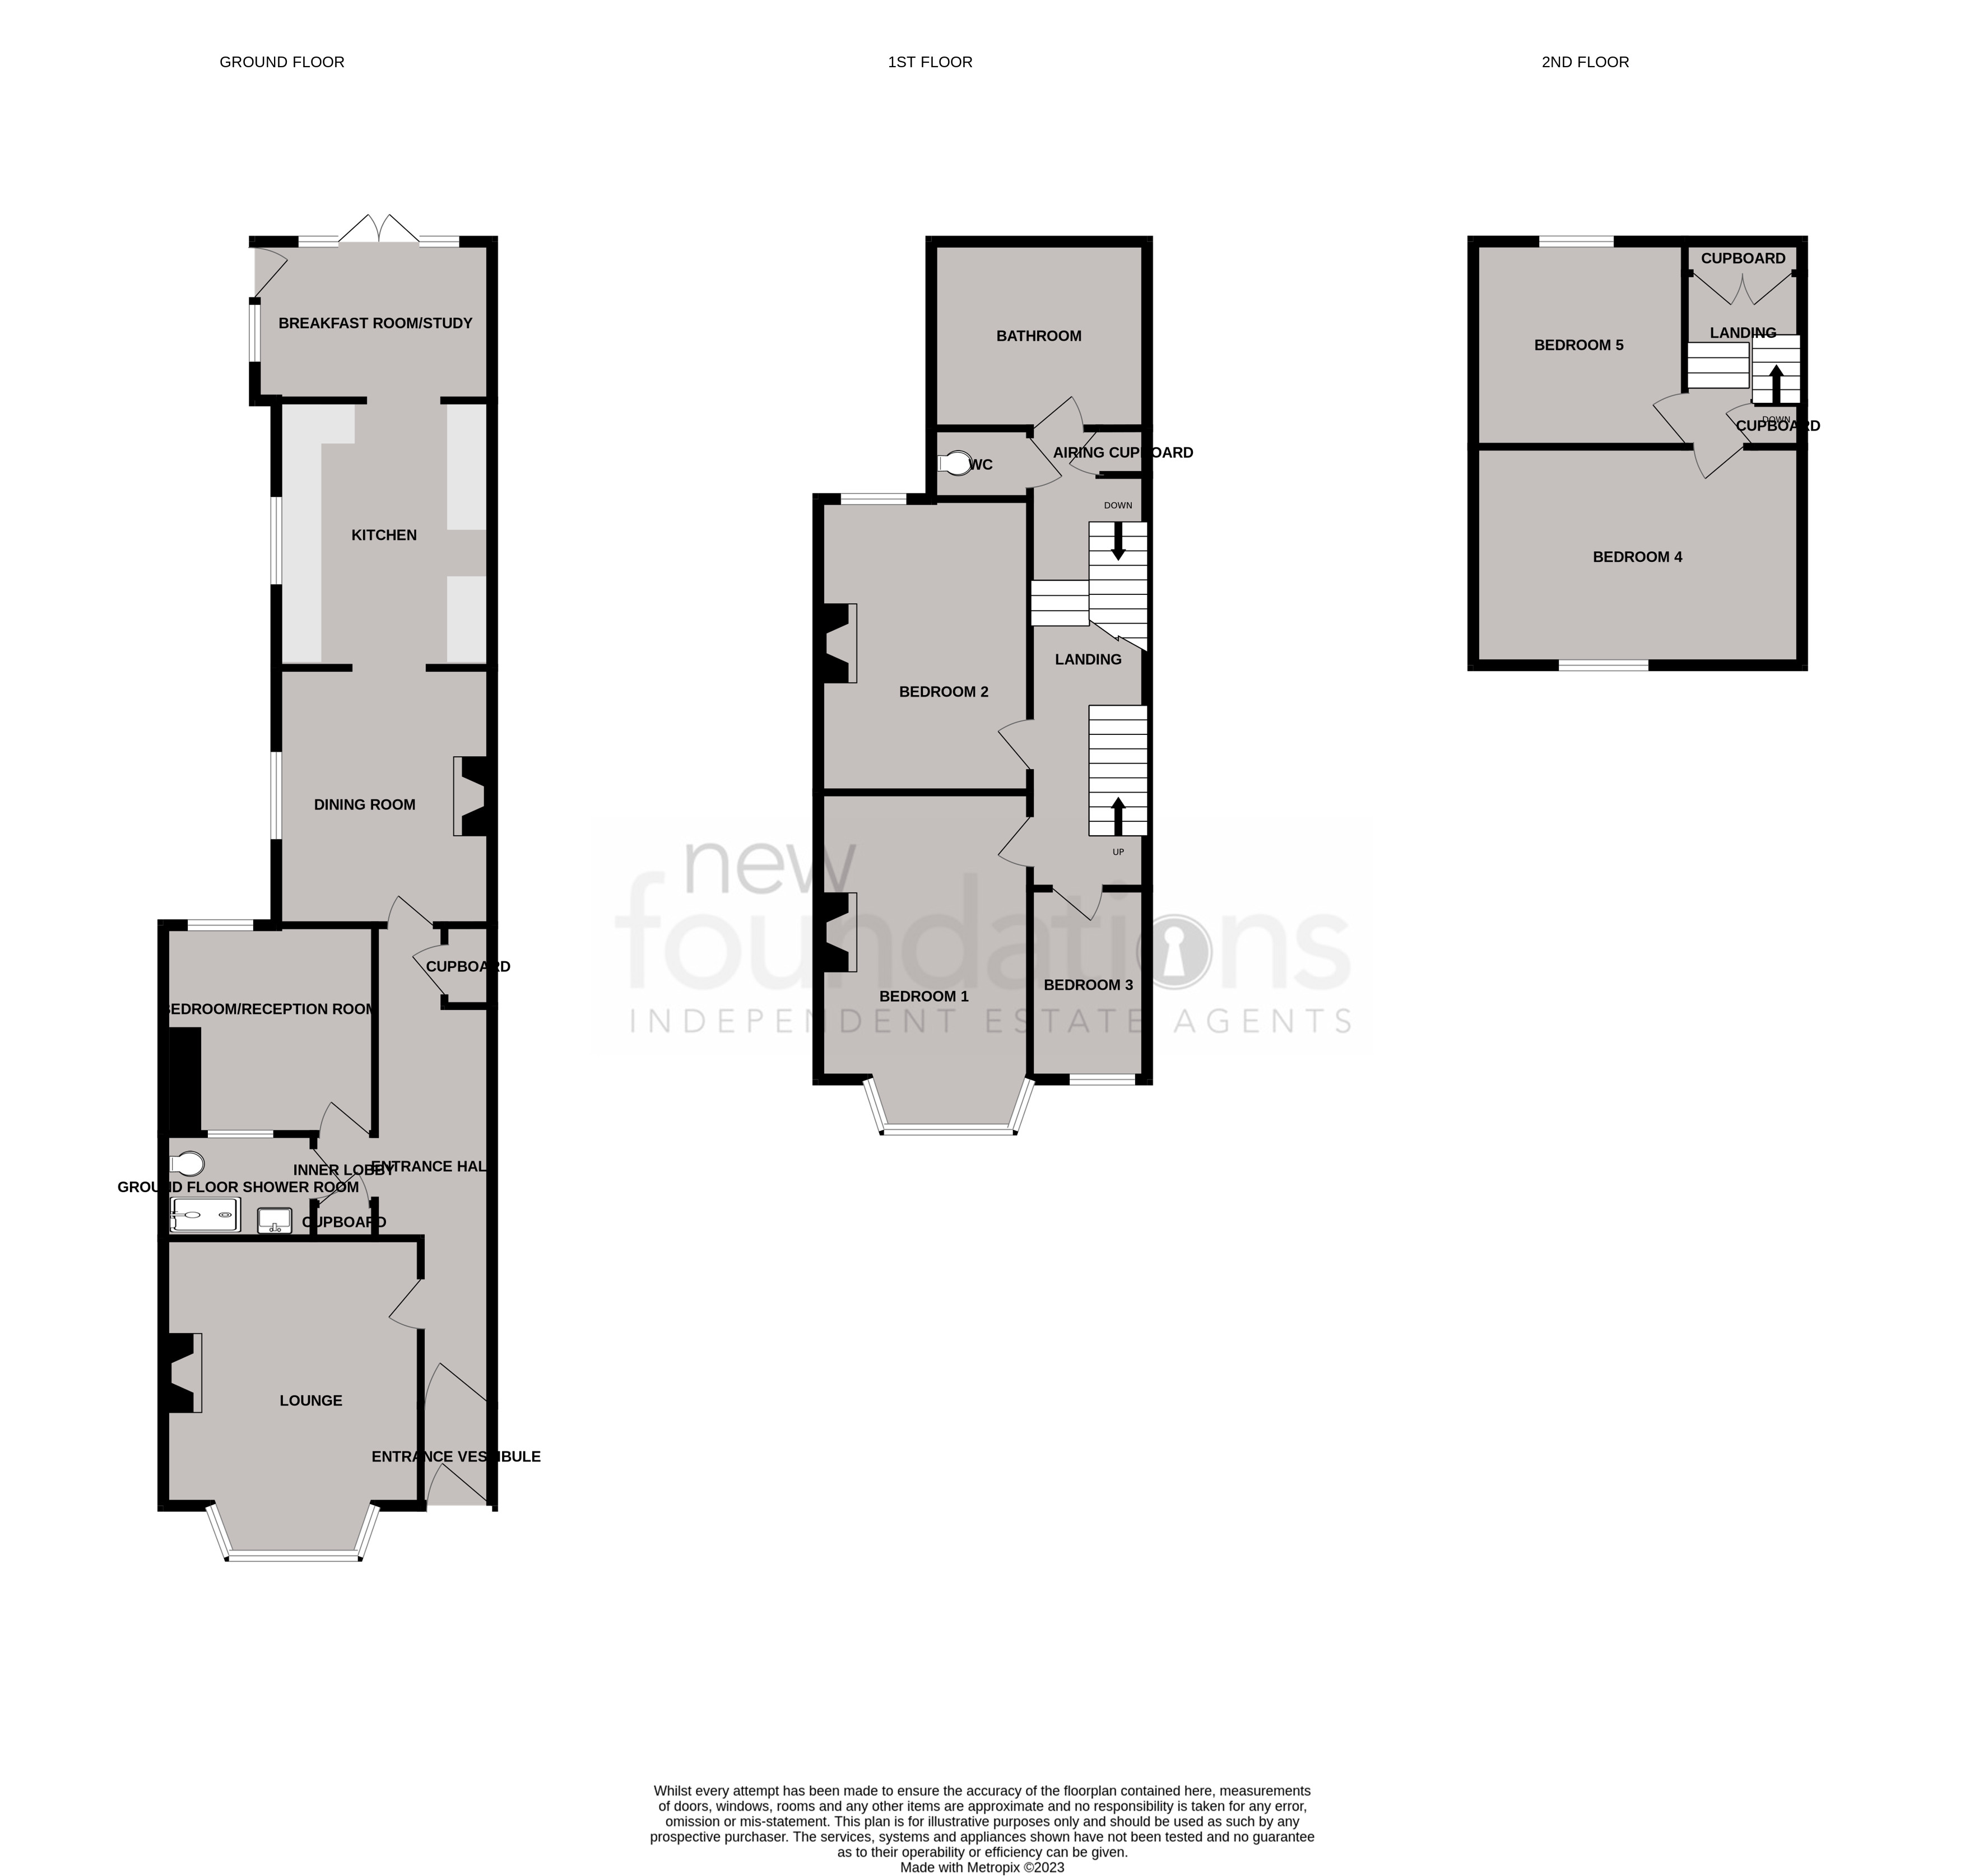 Floorplans For London Road, Bexhill-on-Sea, East Sussex